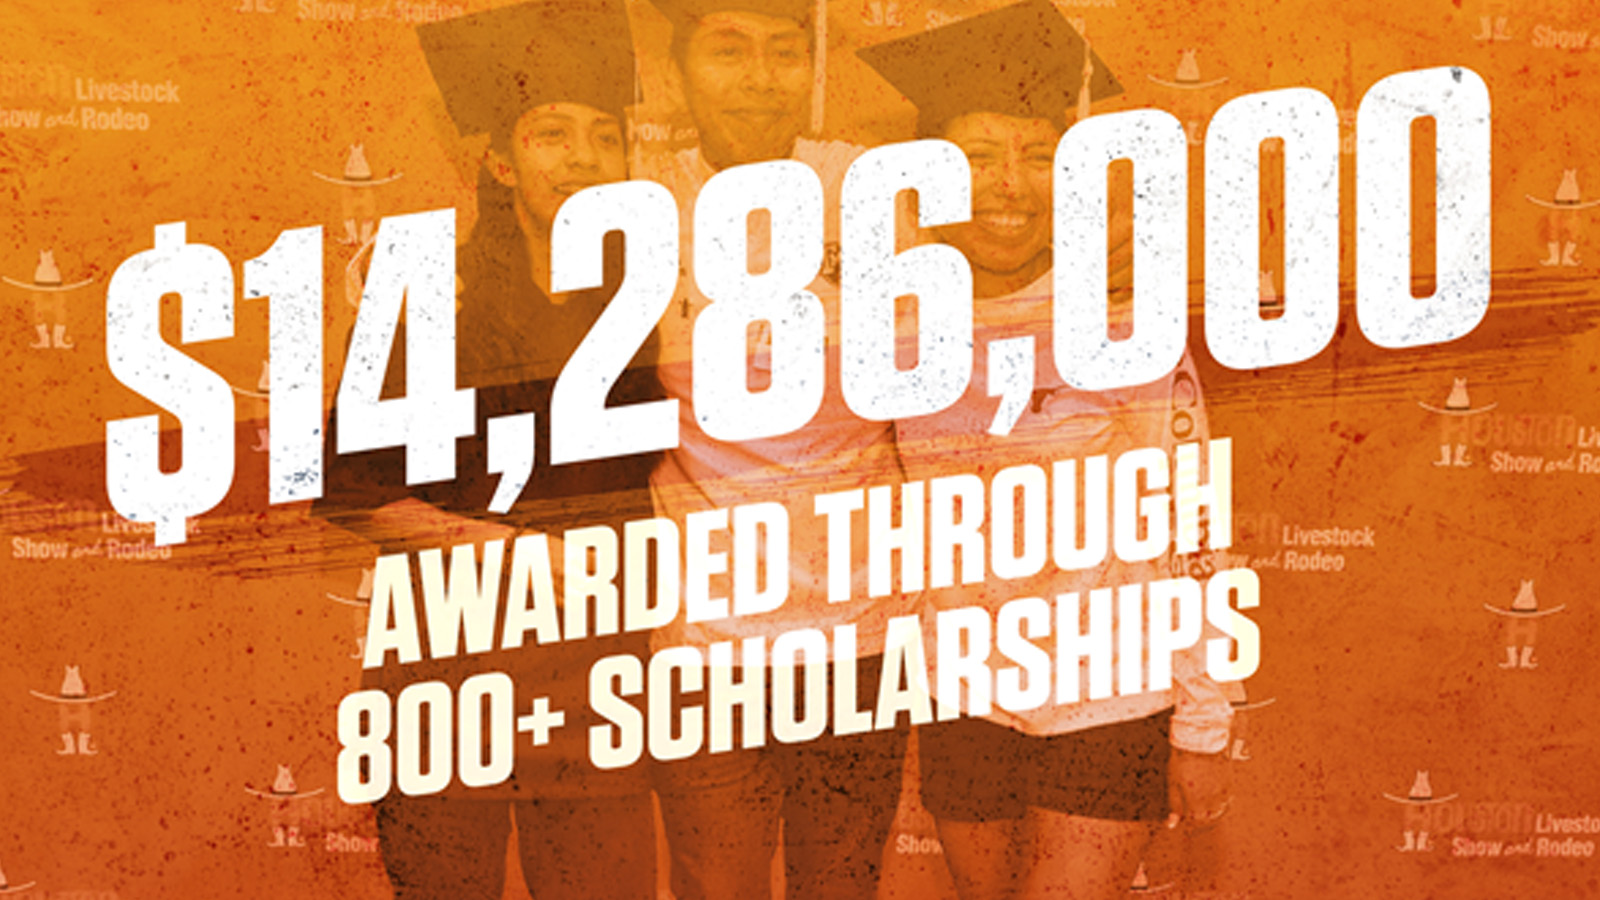 Rodeo Awards Texas High School Students Nearly $10 Million in Scholarships